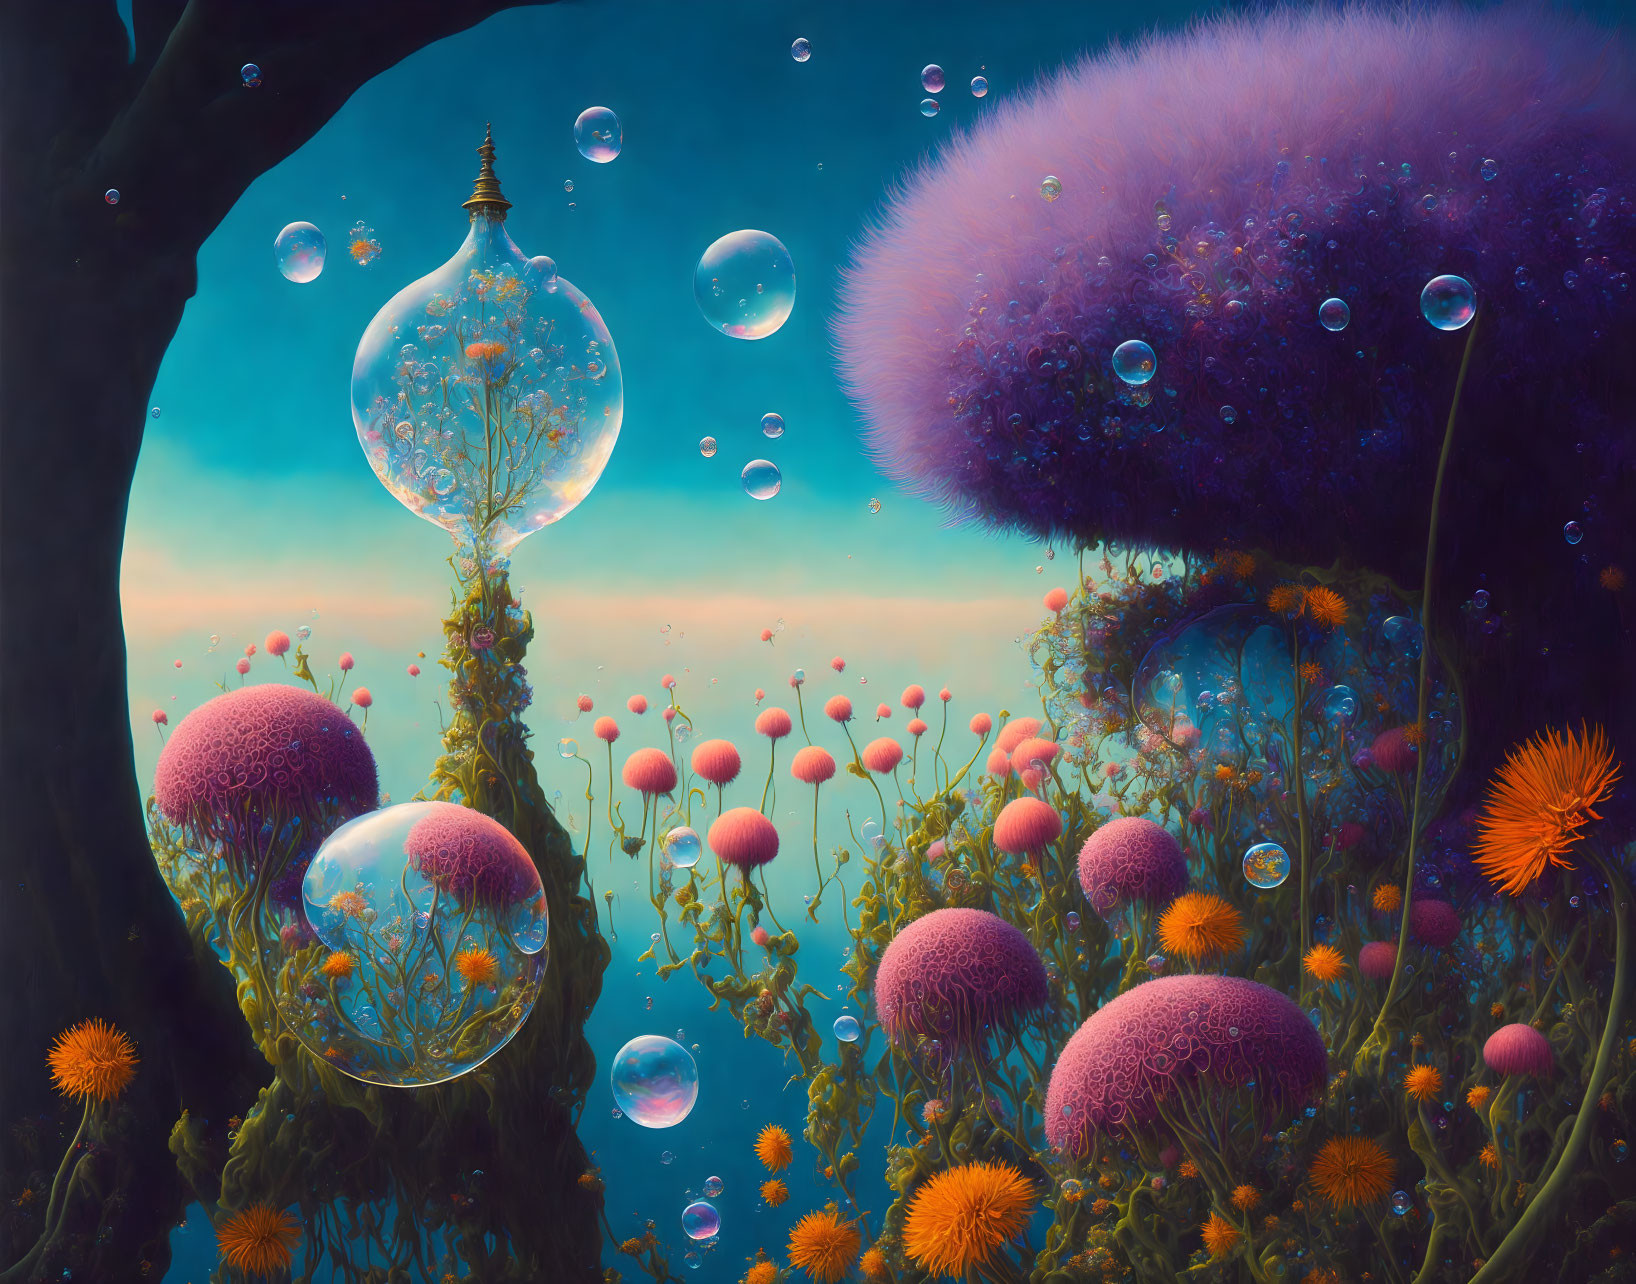 Surreal landscape with bubble-like structures and colorful flora